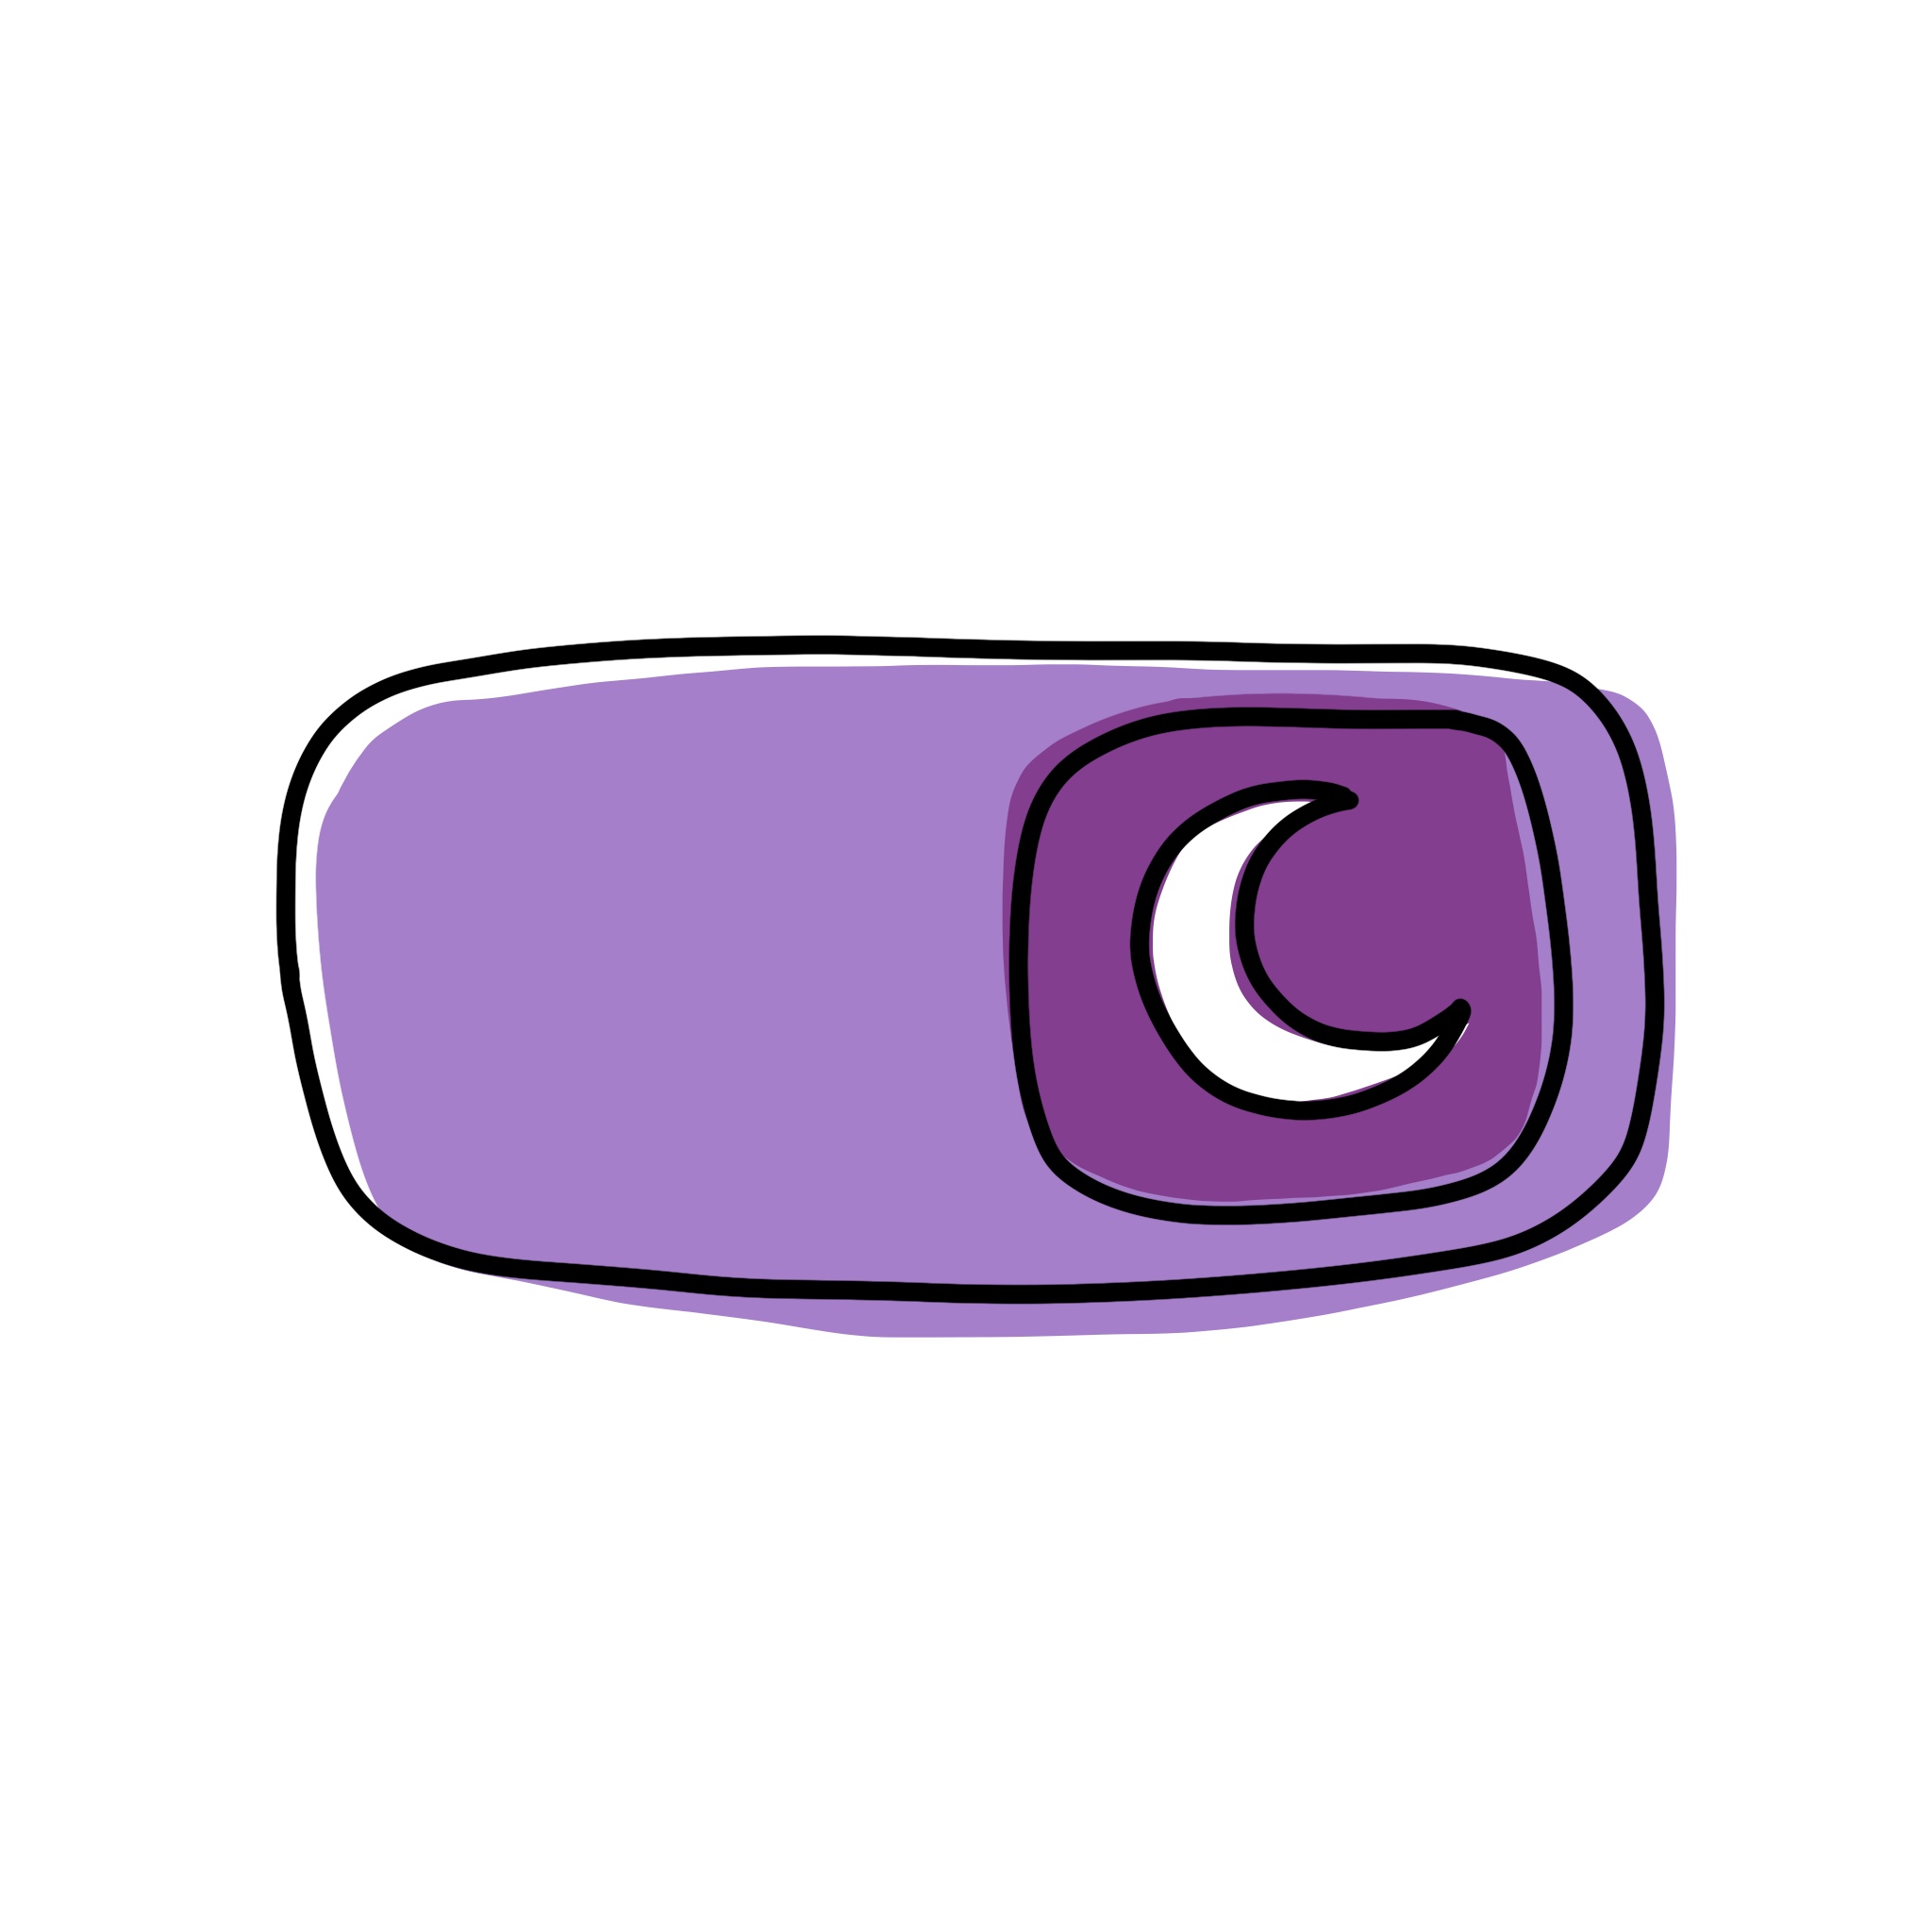 illustration of a do not disturb switch